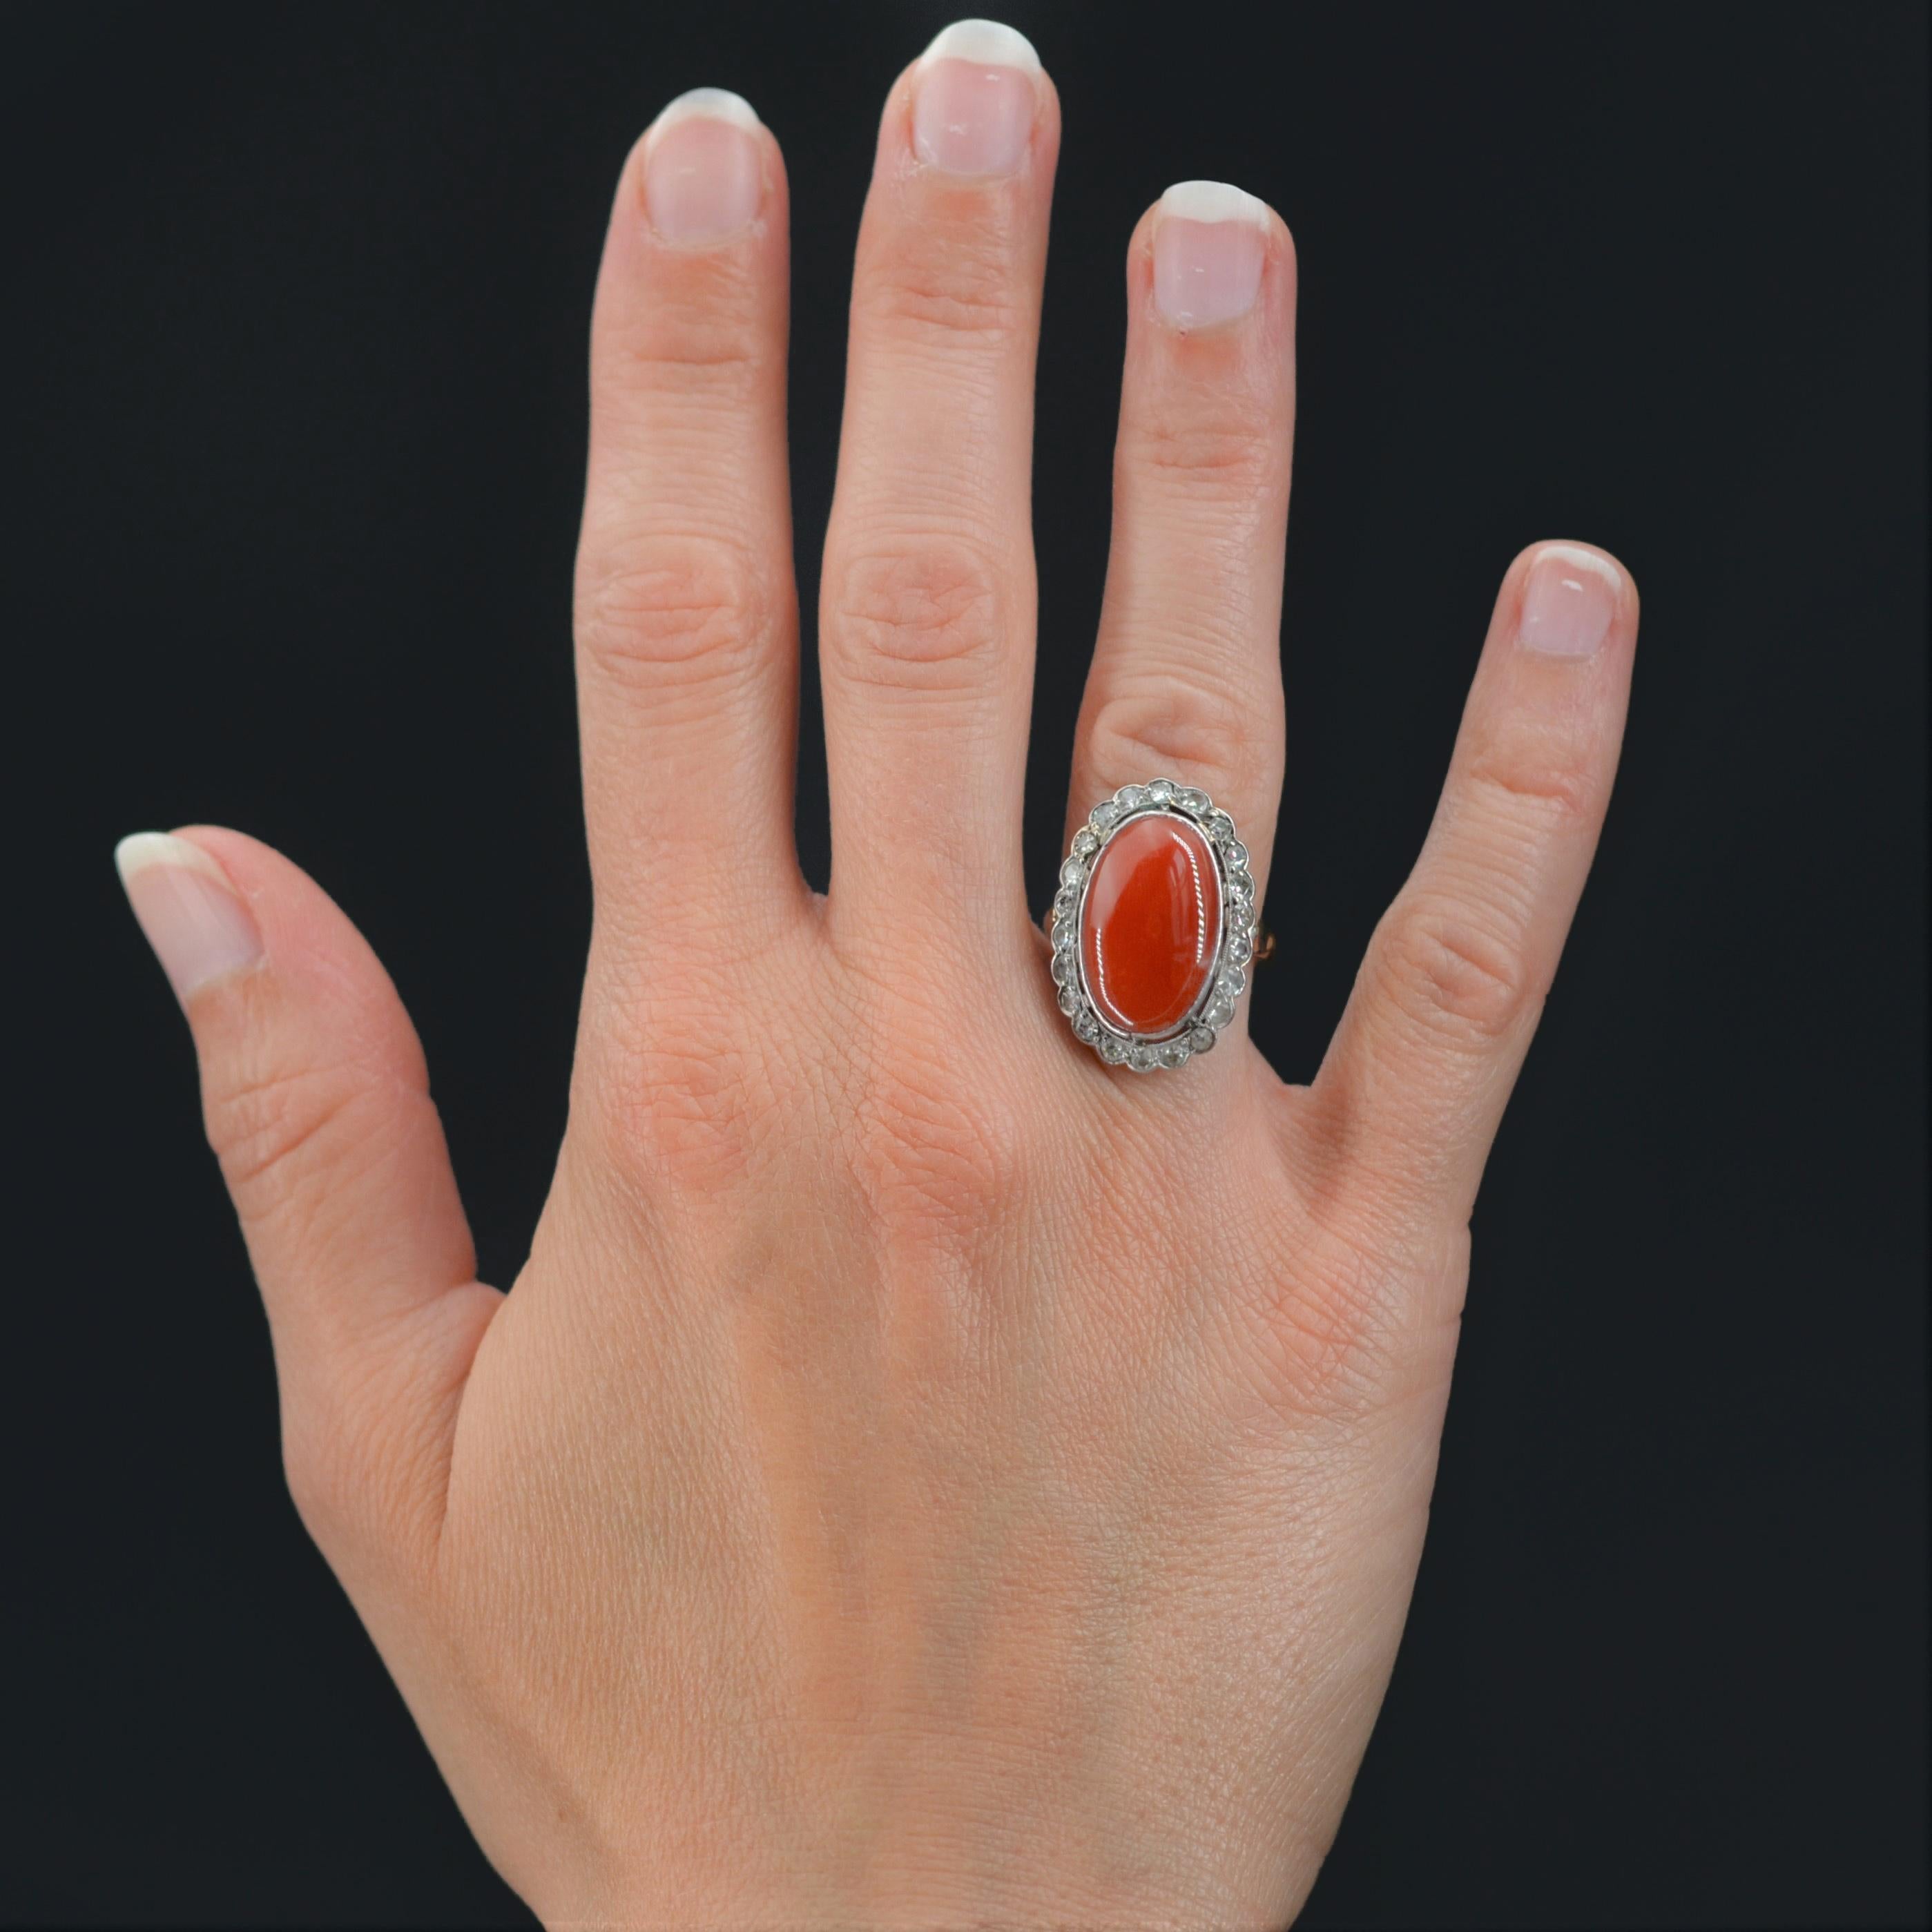 Ring in 18 karat yellow gold, owl hallmark, and platinum.
Pompadour ring, it is decorated in closed setting with a cabochon of Mediterranean coral, in a surround of antique- cut diamonds. The basket is beautifully openworked, and the start of the